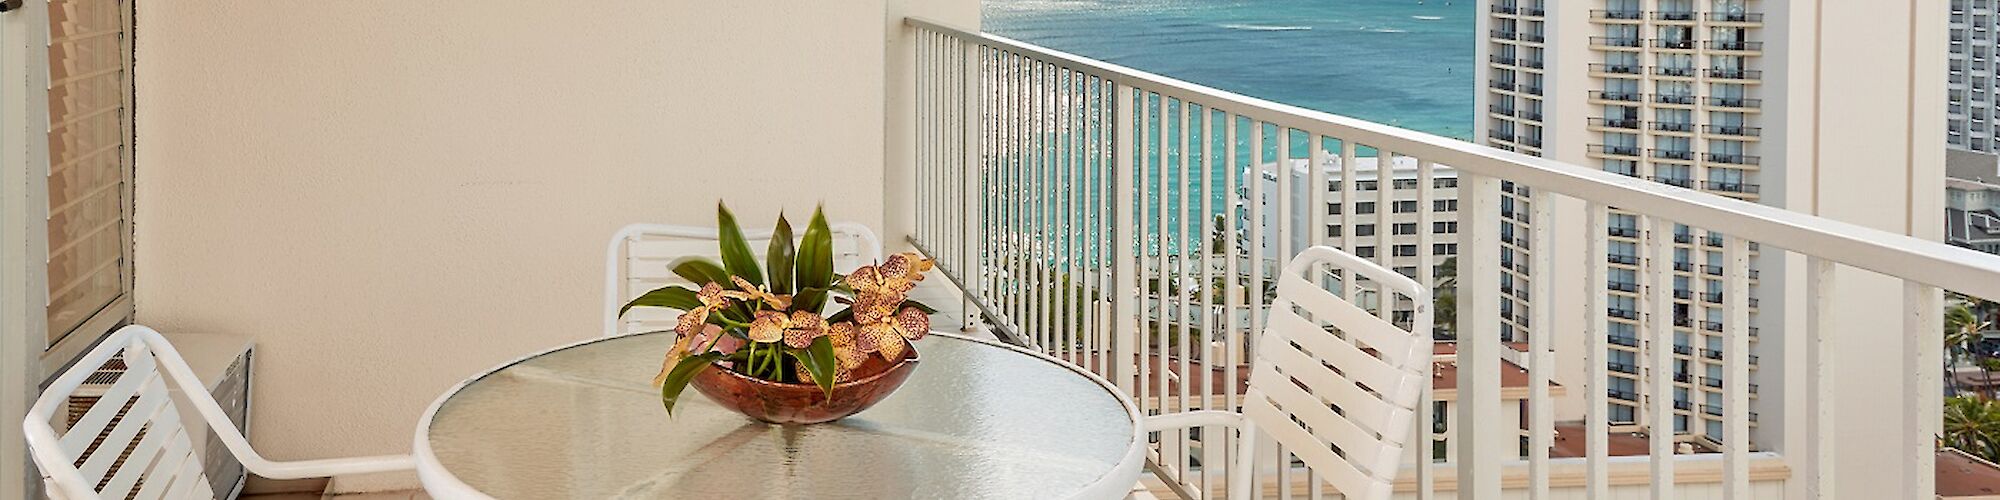 The image shows a balcony with a round glass table, four white chairs, and a potted plant. High-rise buildings and a view of the ocean are visible.